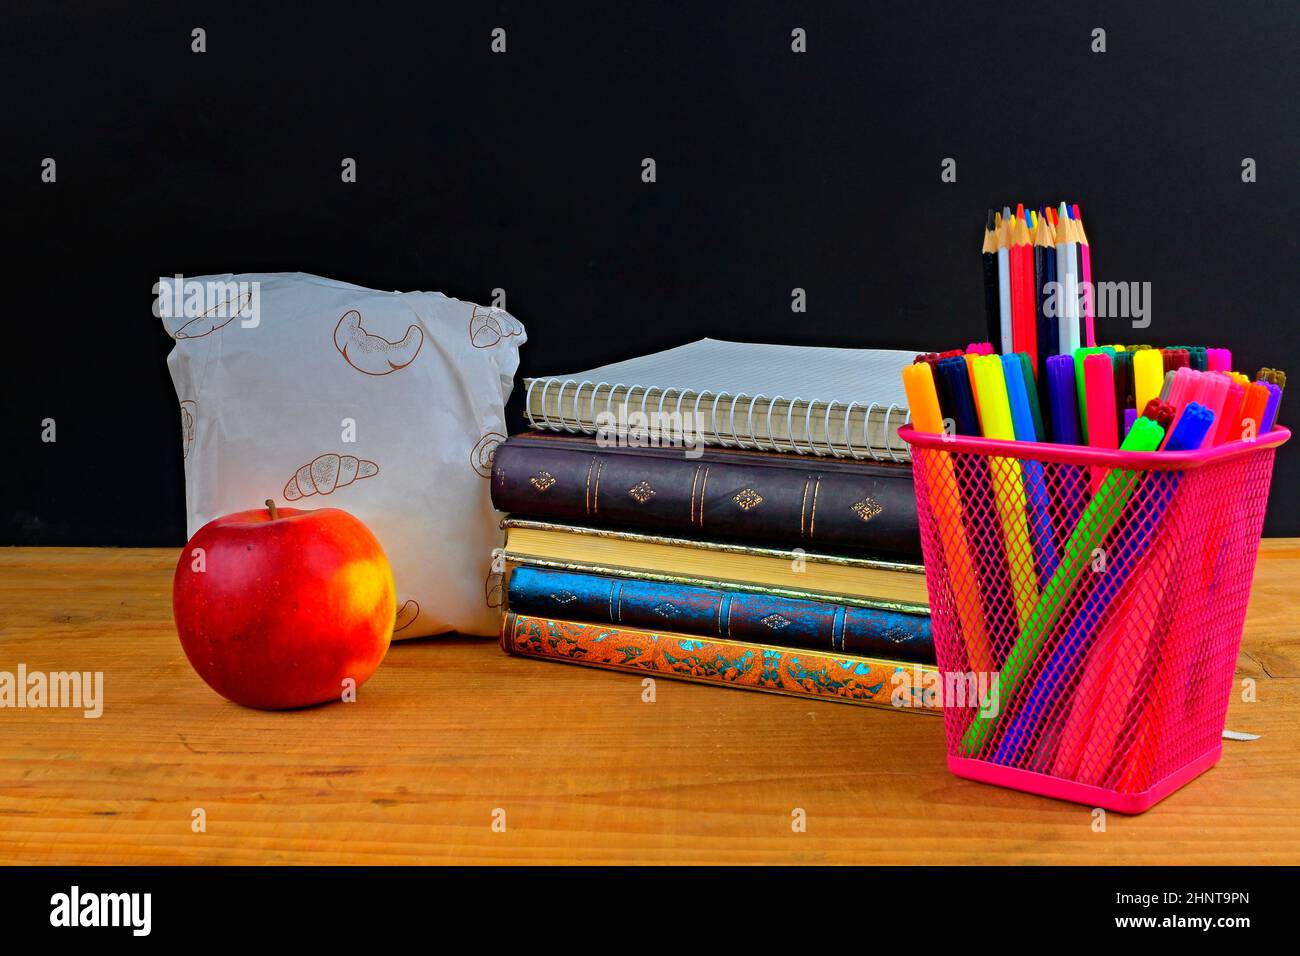 Concept of school lunch break with apple and school supplies on wooden desk, selective focus. Books, markers and color pencils emphasizing the concept. Time for study and relax. Stock Photo